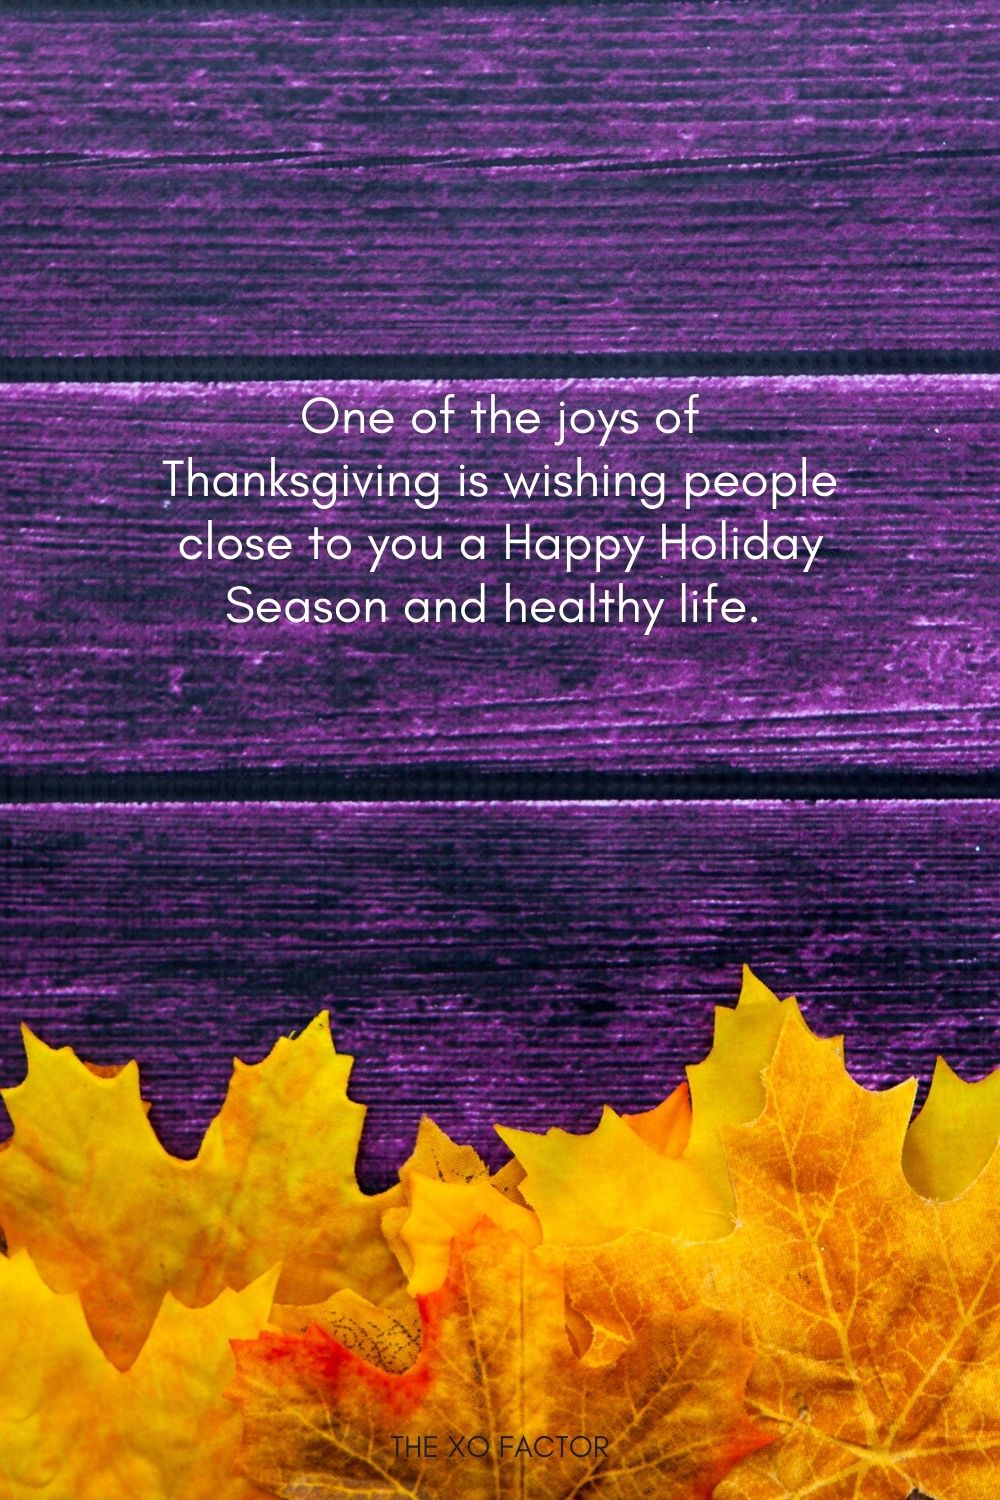 One of the joys of Thanksgiving is wishing people close to you a Happy Holiday Season and healthy life.